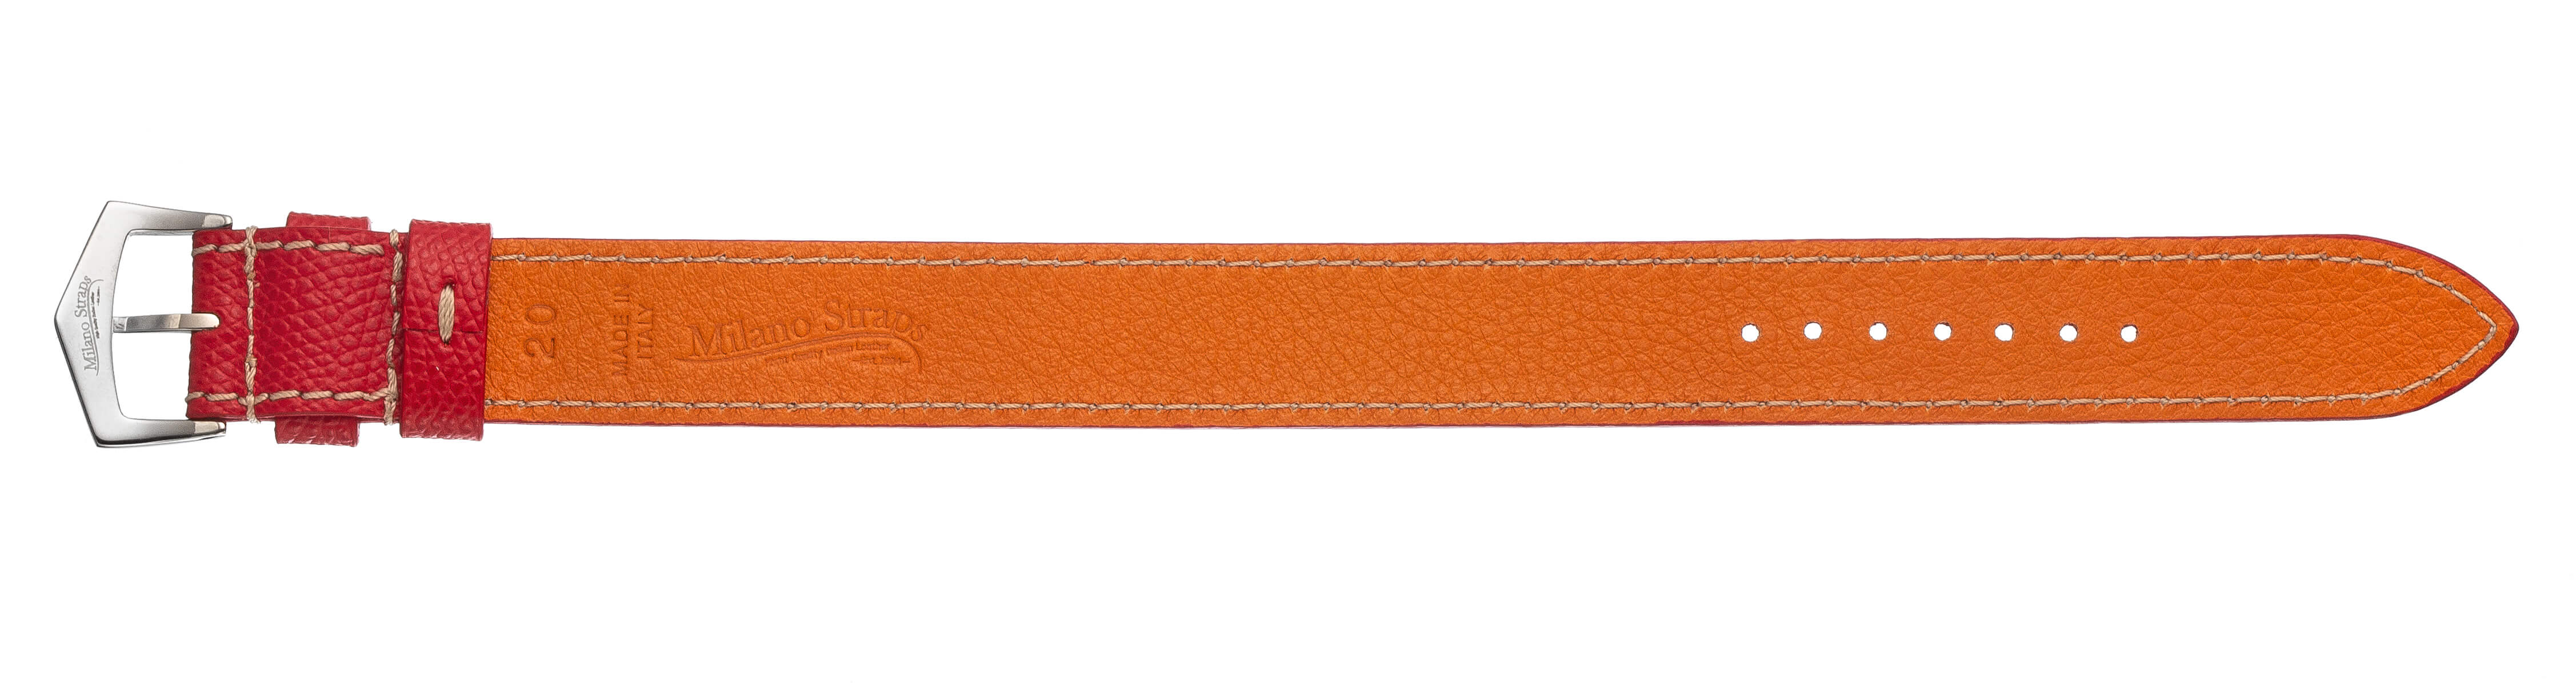 Red Single Pass Watch Strap - Milano Straps